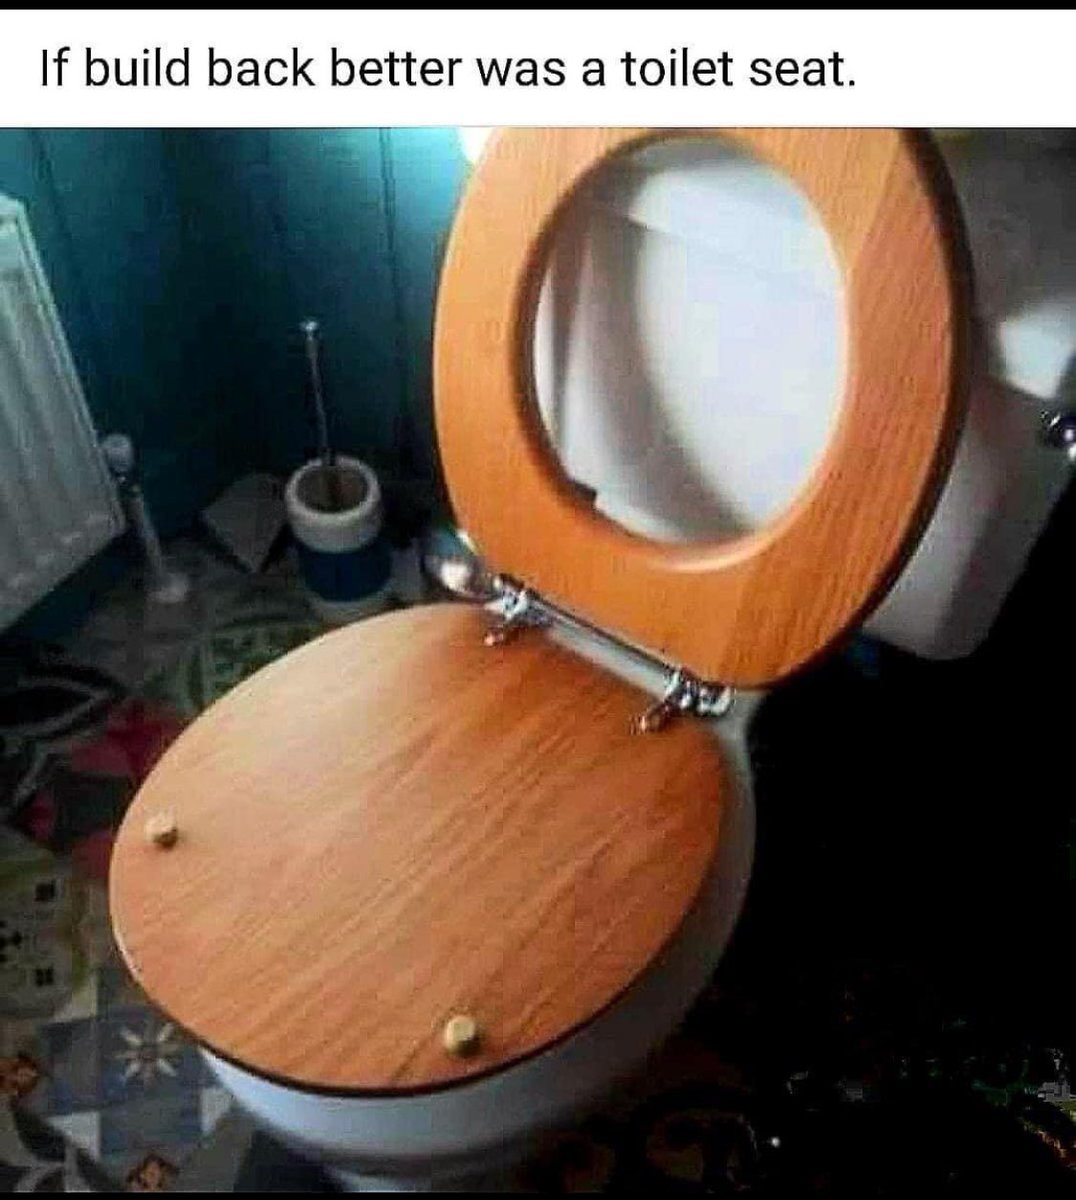 Hey, someone fitted this toilet seat in the dark, with both eyes closed and with extremely dark sunglasses 🤣🤣🤣